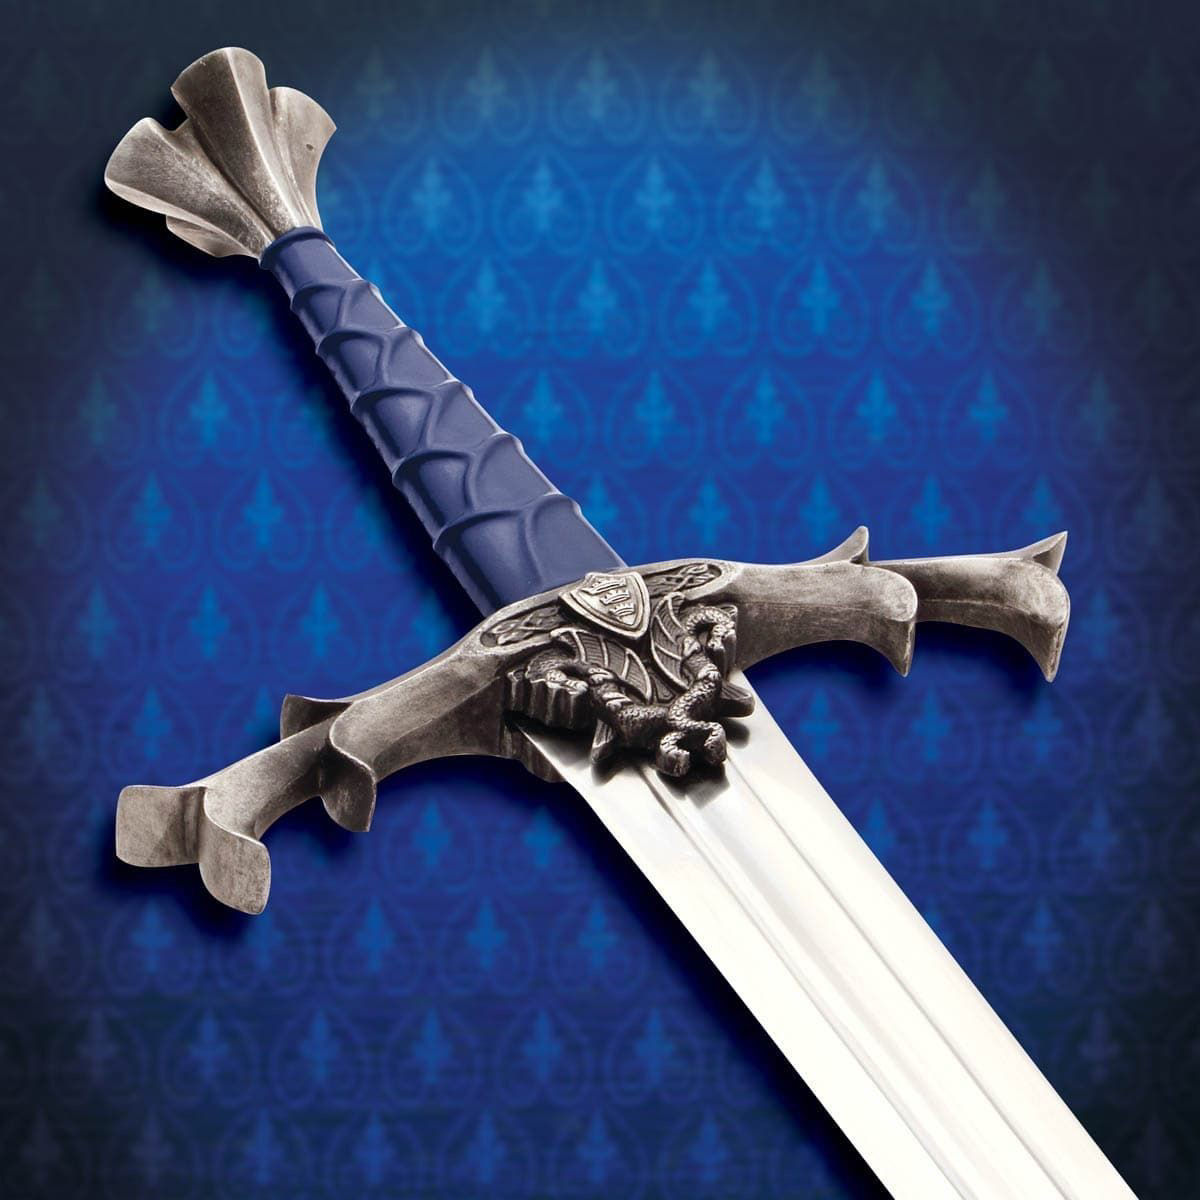 The Sword Excalibur by Windlass Steelcrafts